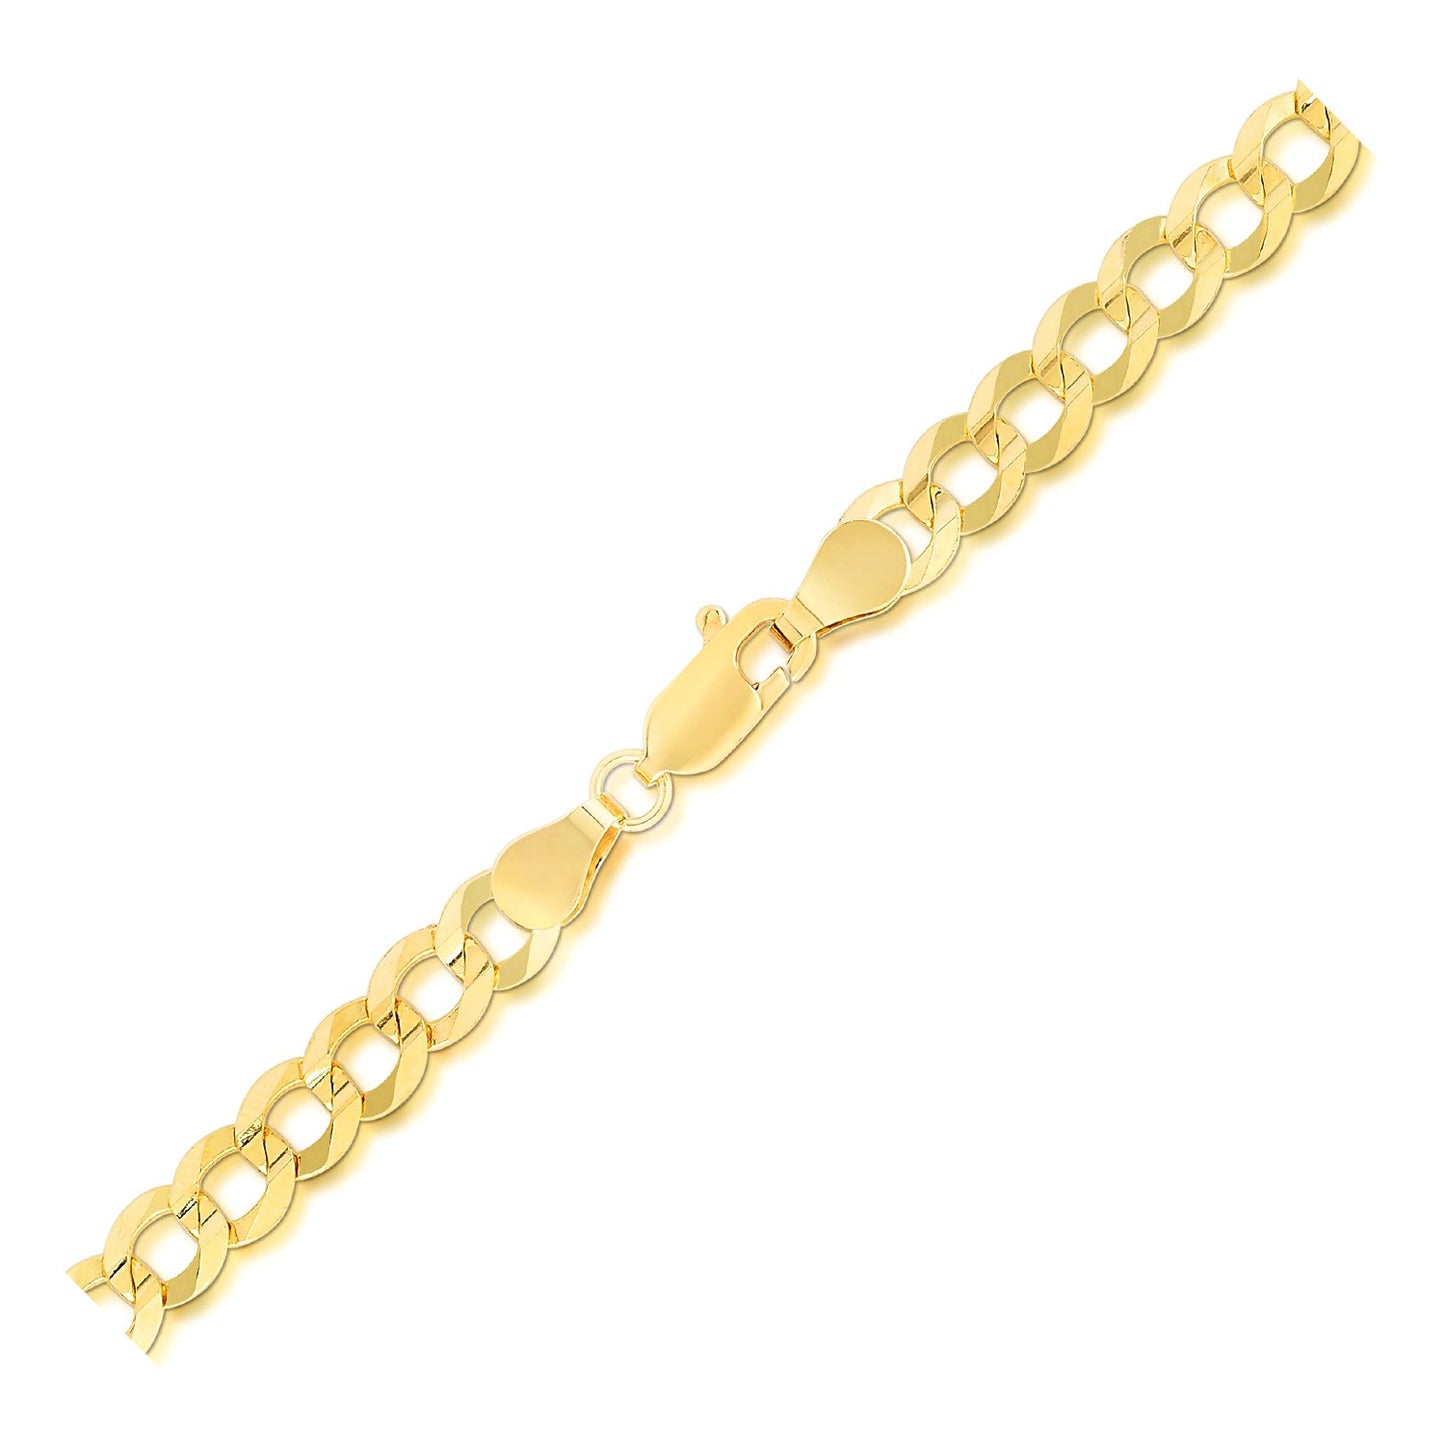 5.7mm 14k Yellow Gold Solid Curb Bracelet